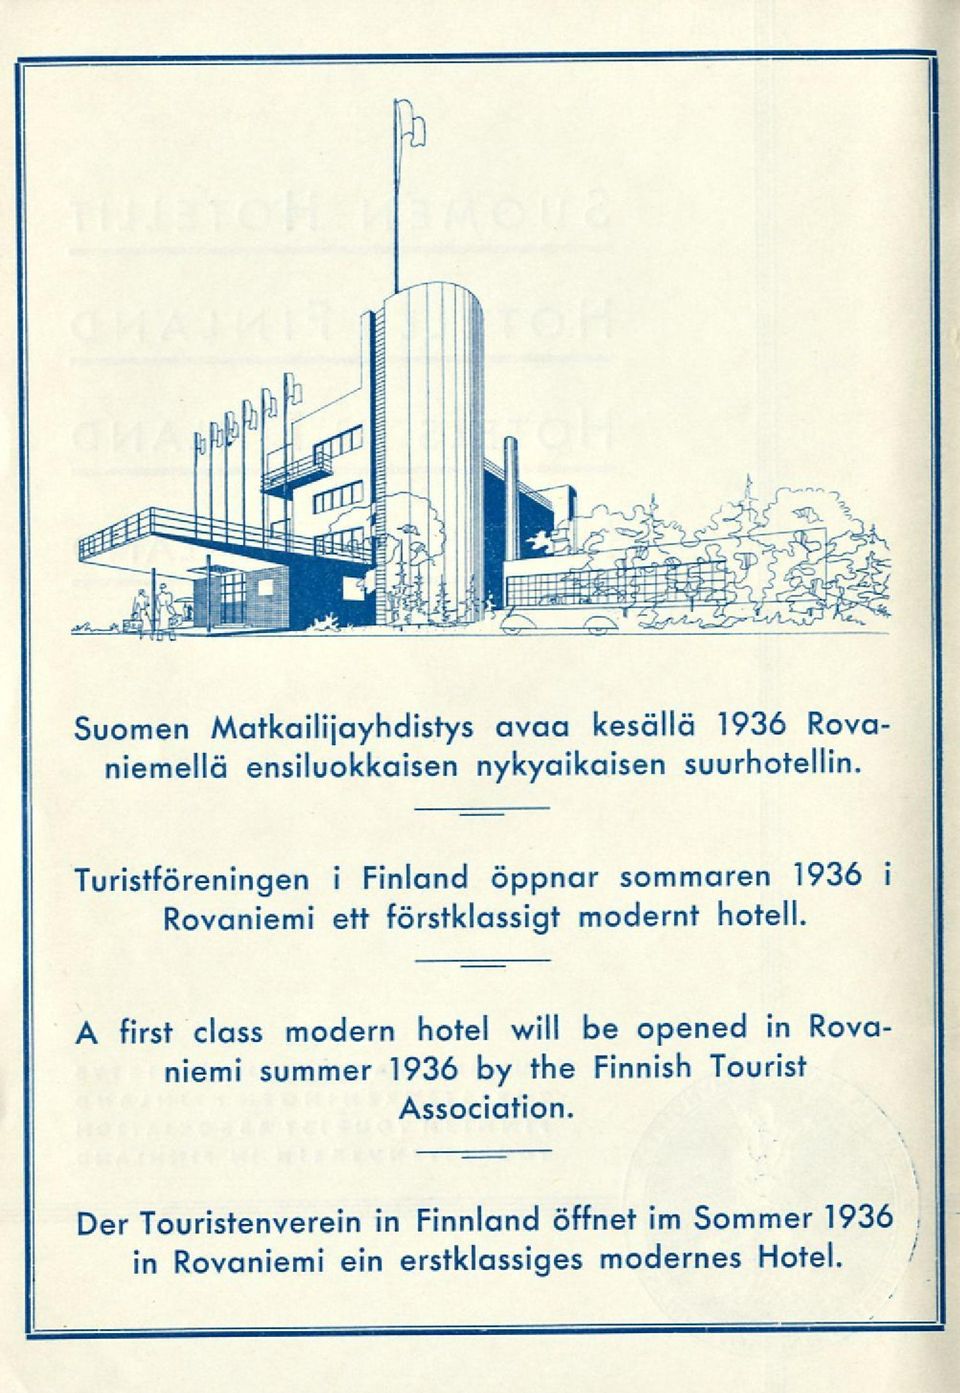 A first class modern hotel will be opened in Rovaniemi summer 1936 by the Finnish Tourist